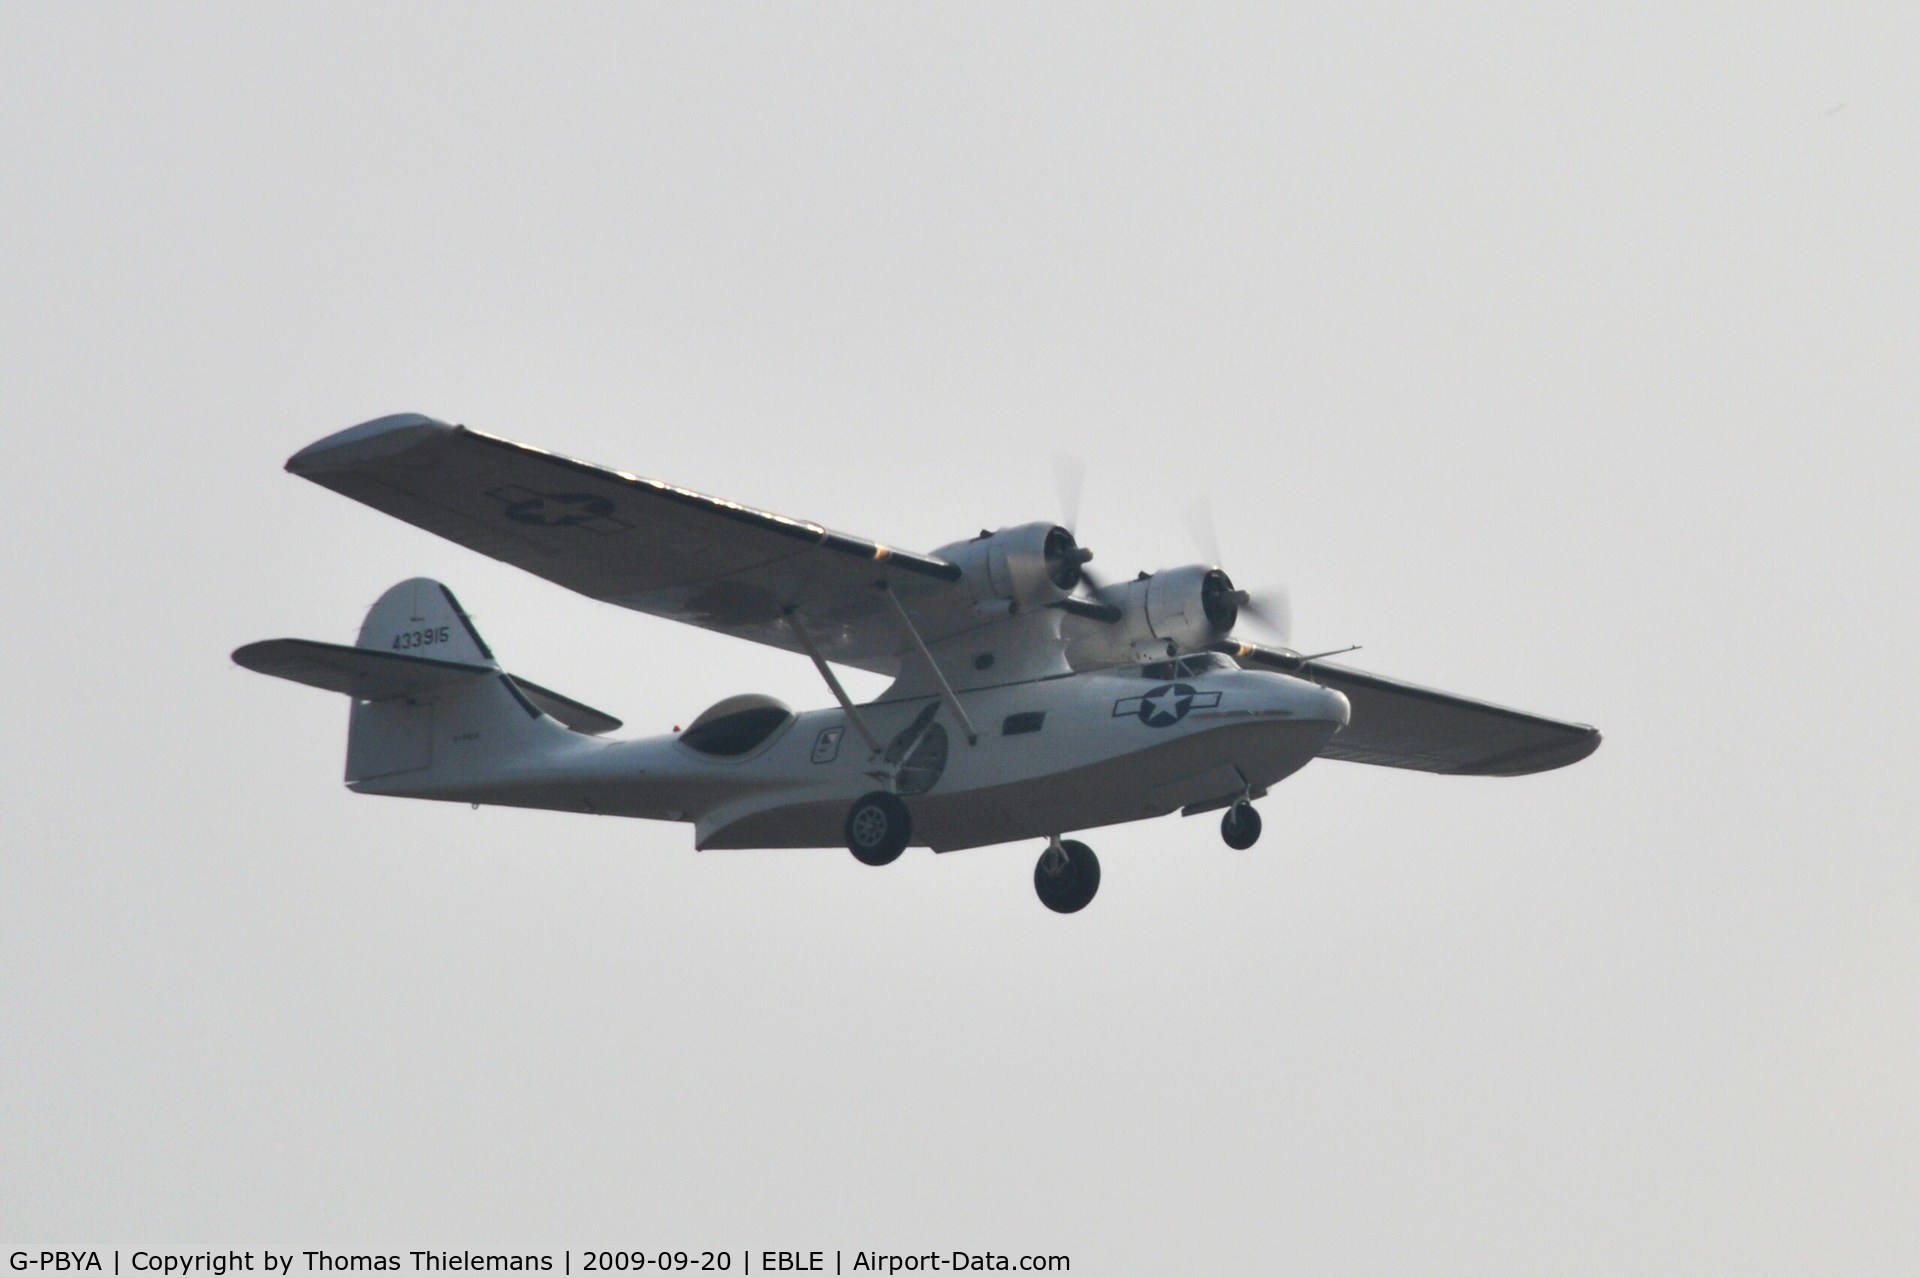 G-PBYA, 1944 Consolidated (Canadian Vickers) PBV-1A Canso A C/N CV-283, Sanicole Airshow 2009